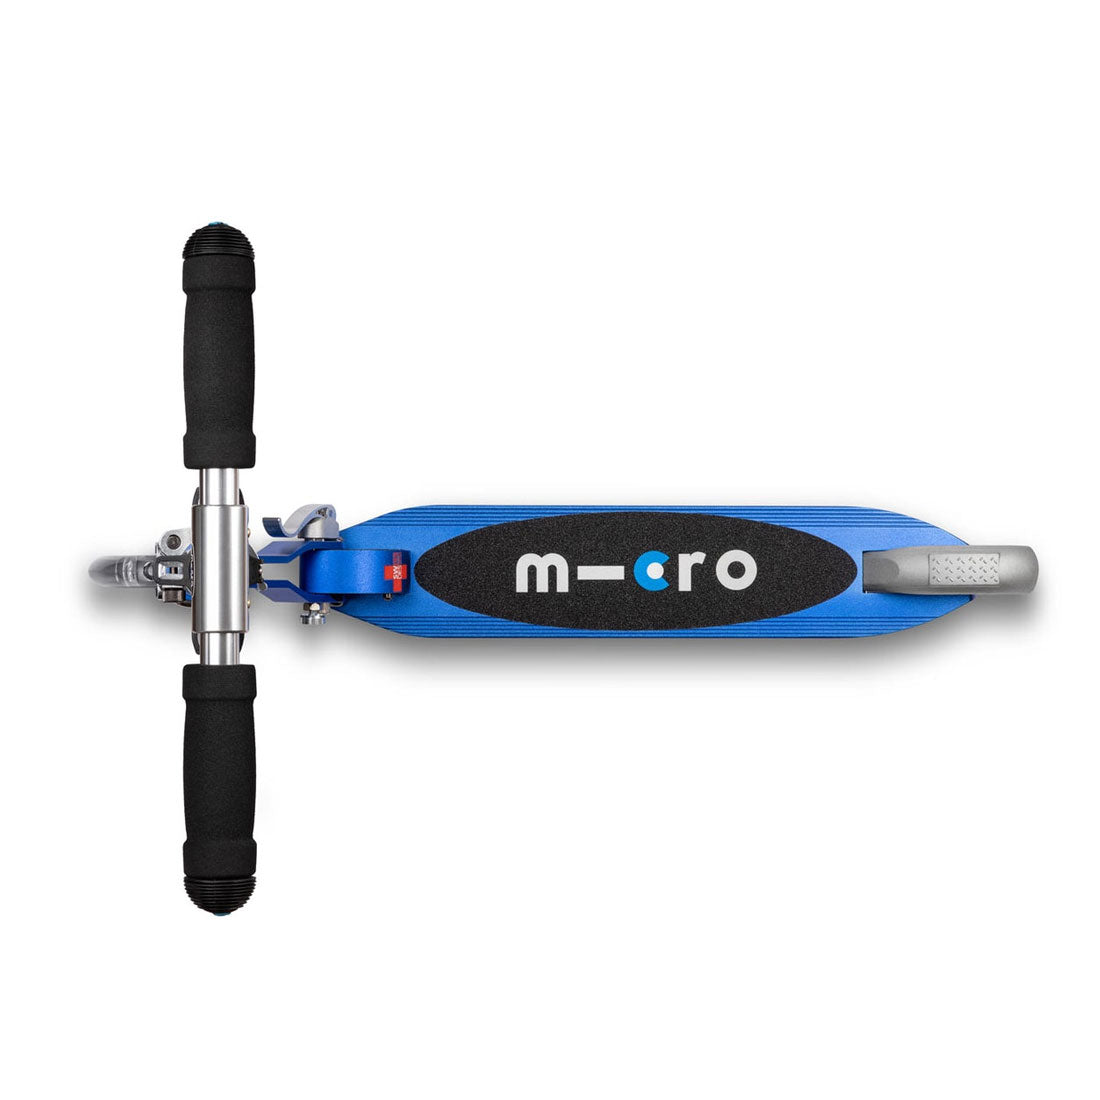 Micro Sprite Scooter - Sapphire Blue Scooter Completes Rec